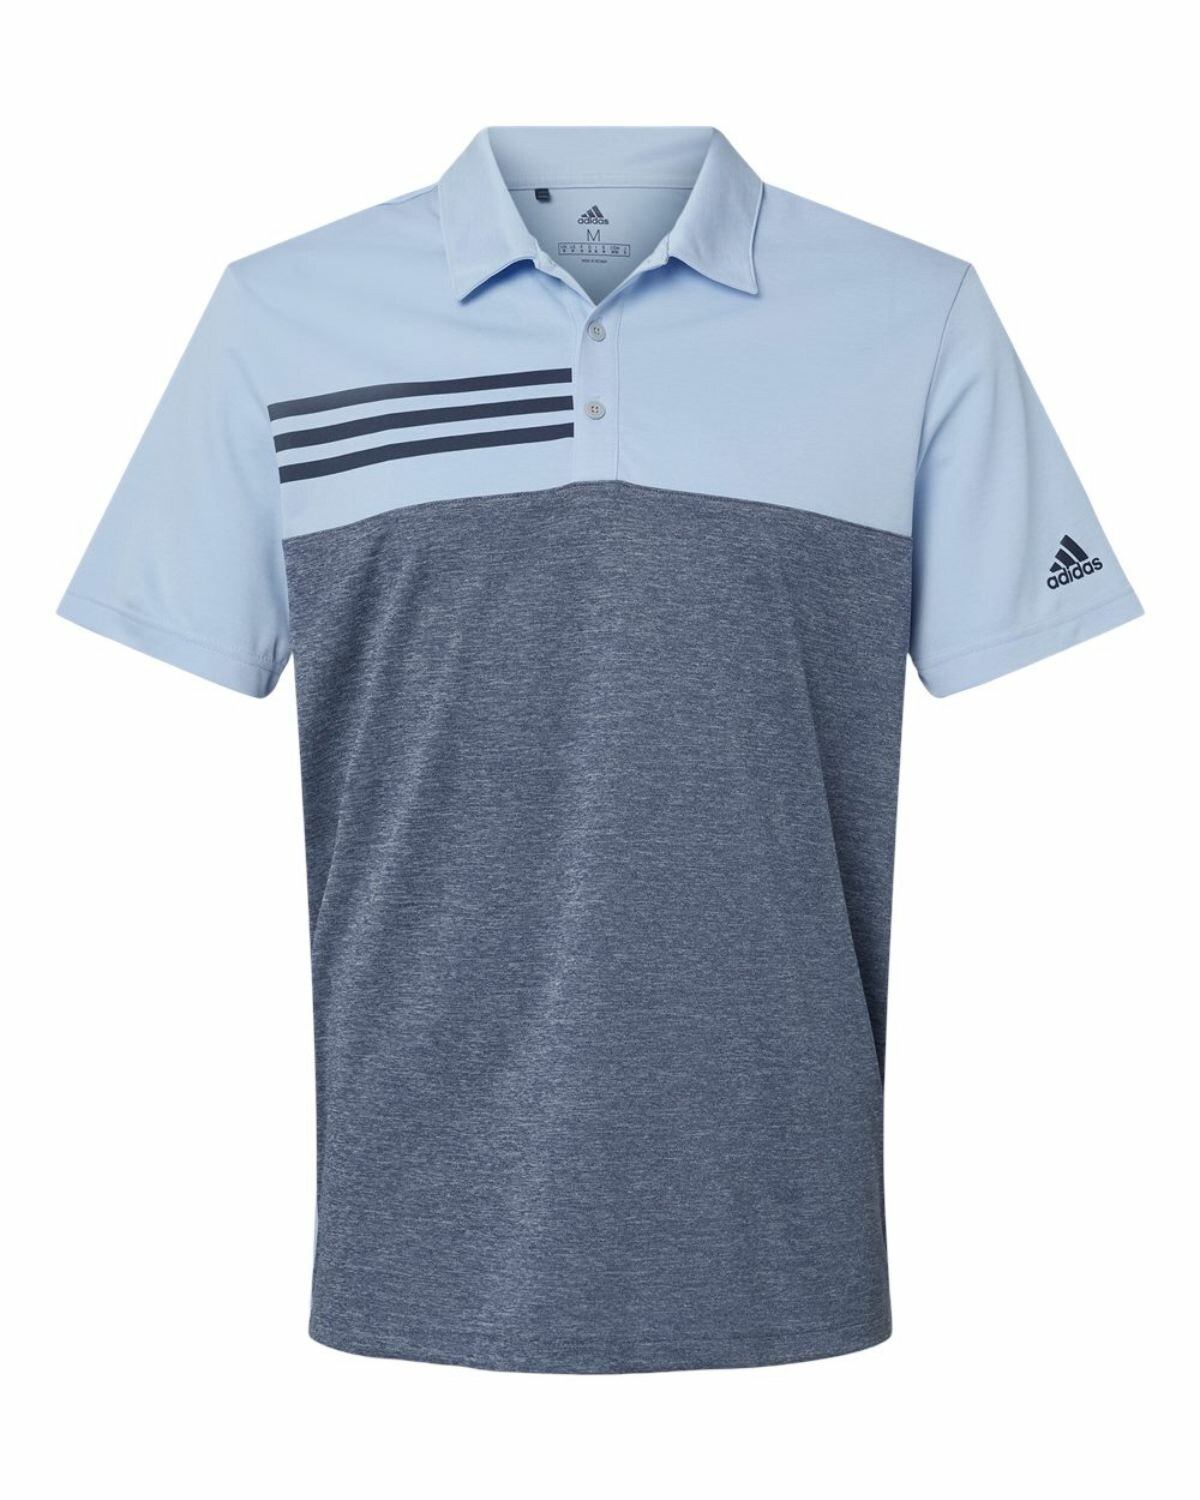 Custom Golf A508 Heathered Colorblock 3-Stripes Polo Apparel | promotional Product |Team